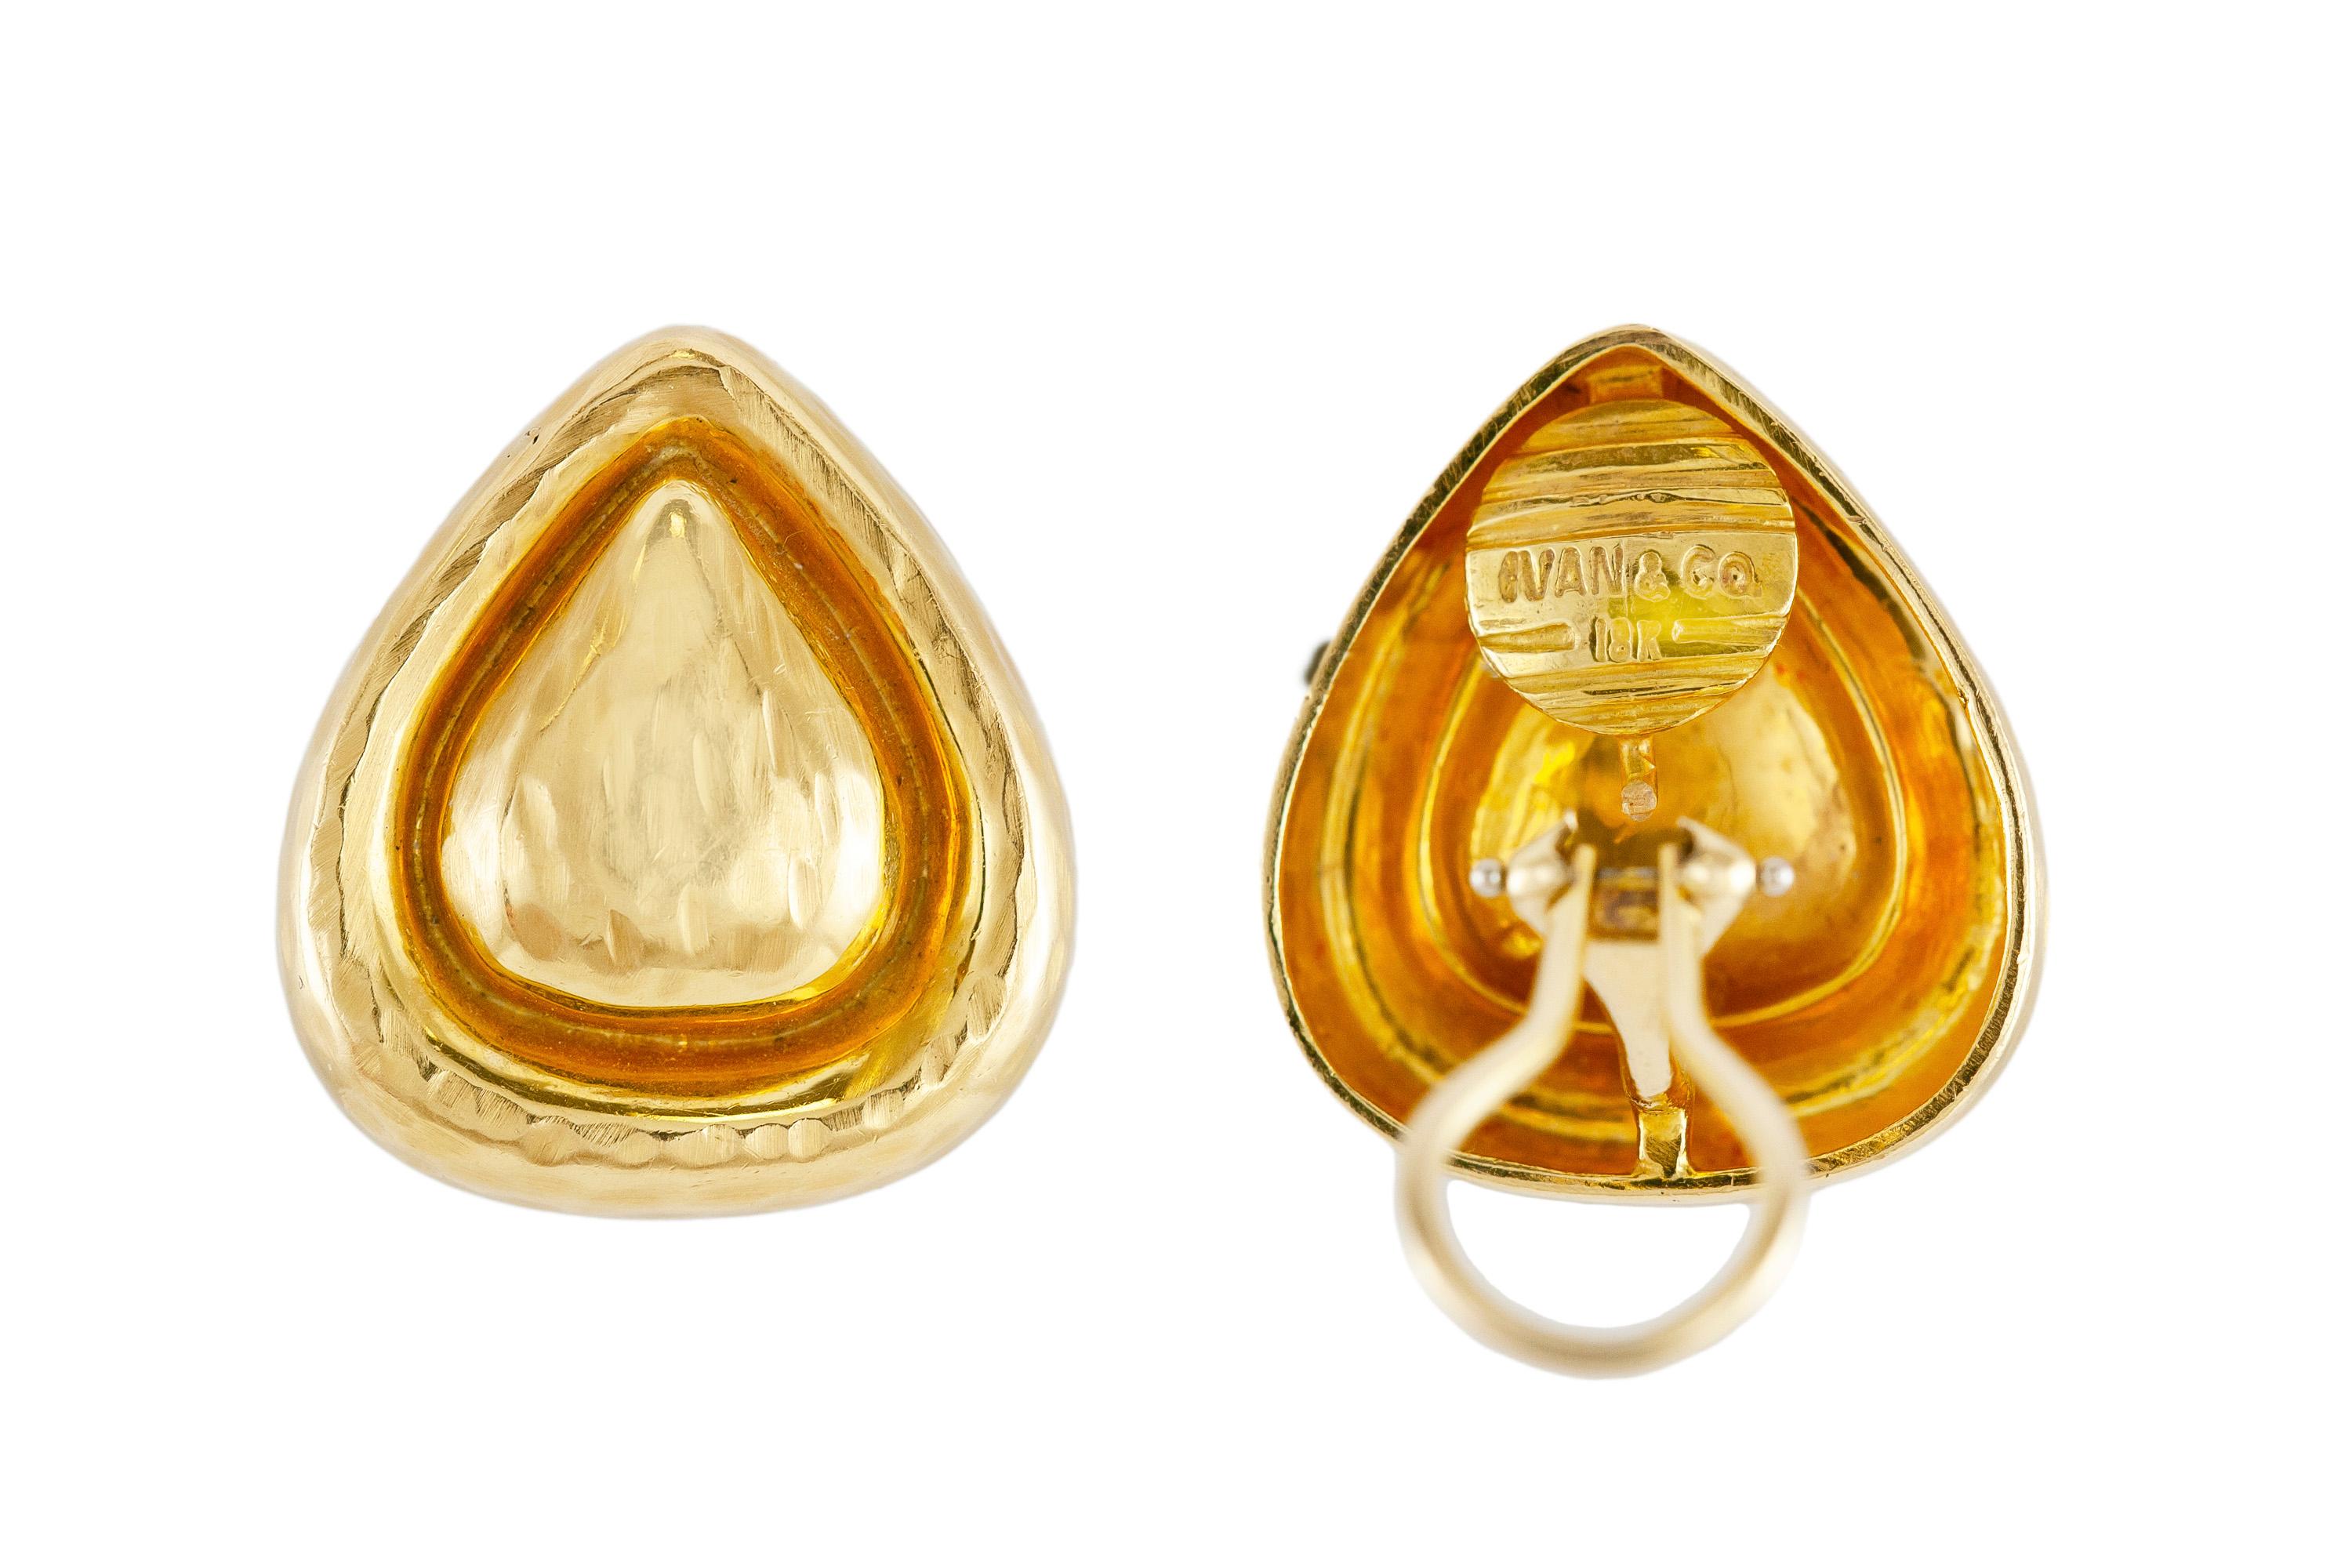 The earrings are finely crafted in 18k hammered yellow gold, weighing 14.3 dwt. Signed by Ivan & Co. 
Circa 1940.